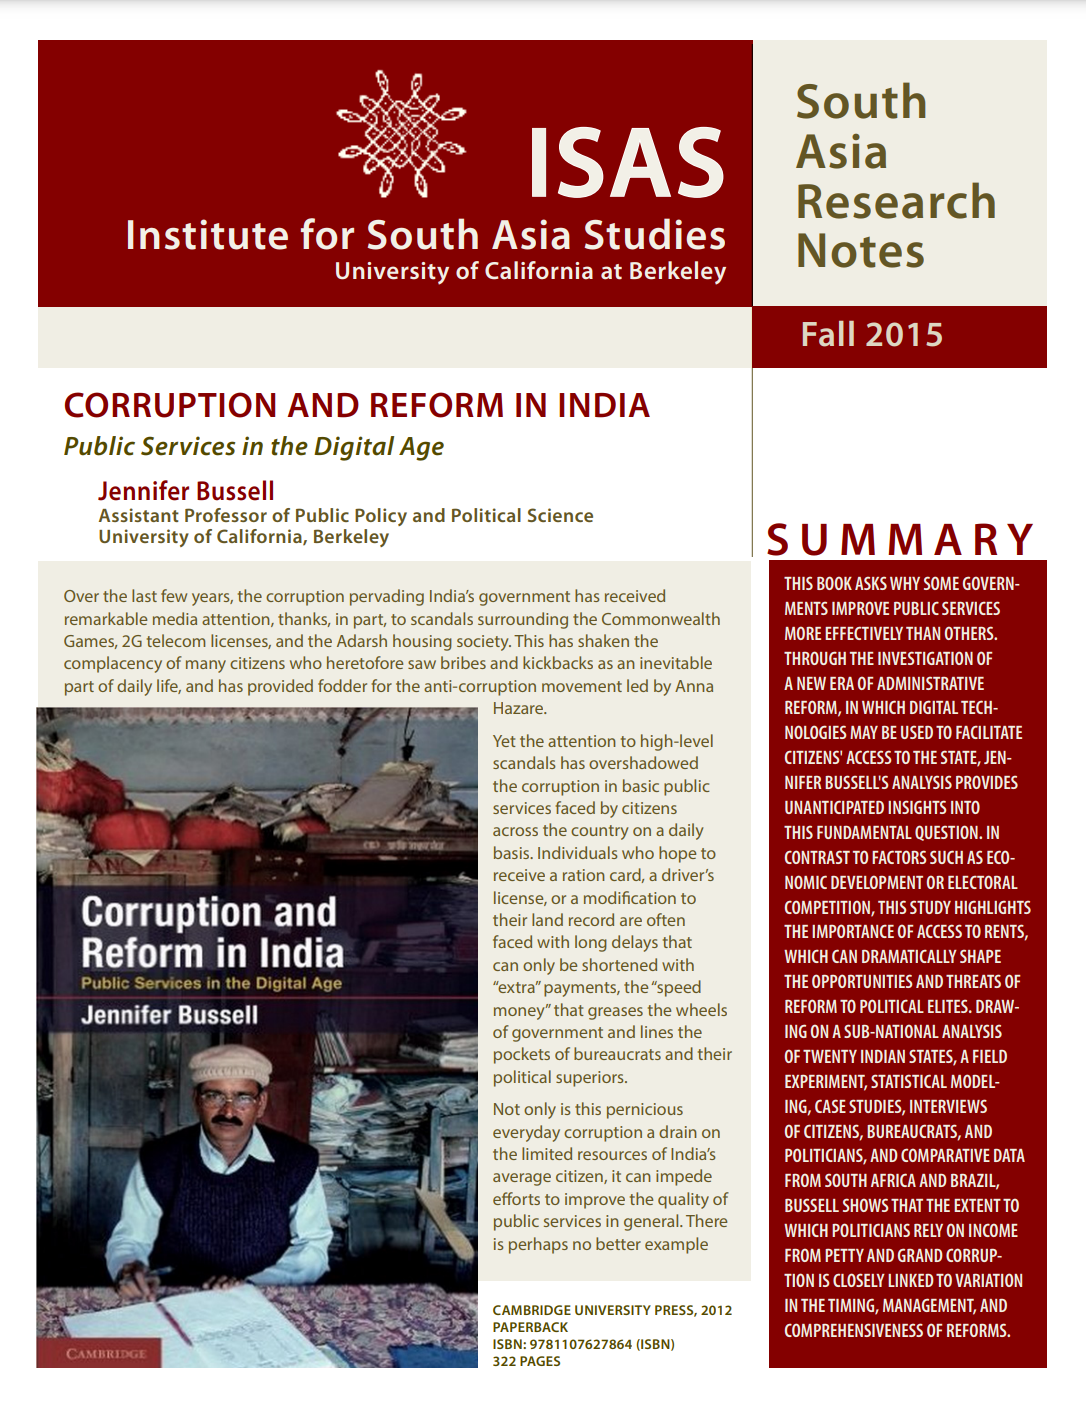 Cover image of SA Research Notes, Fall 2015 by Jennifer Bussell